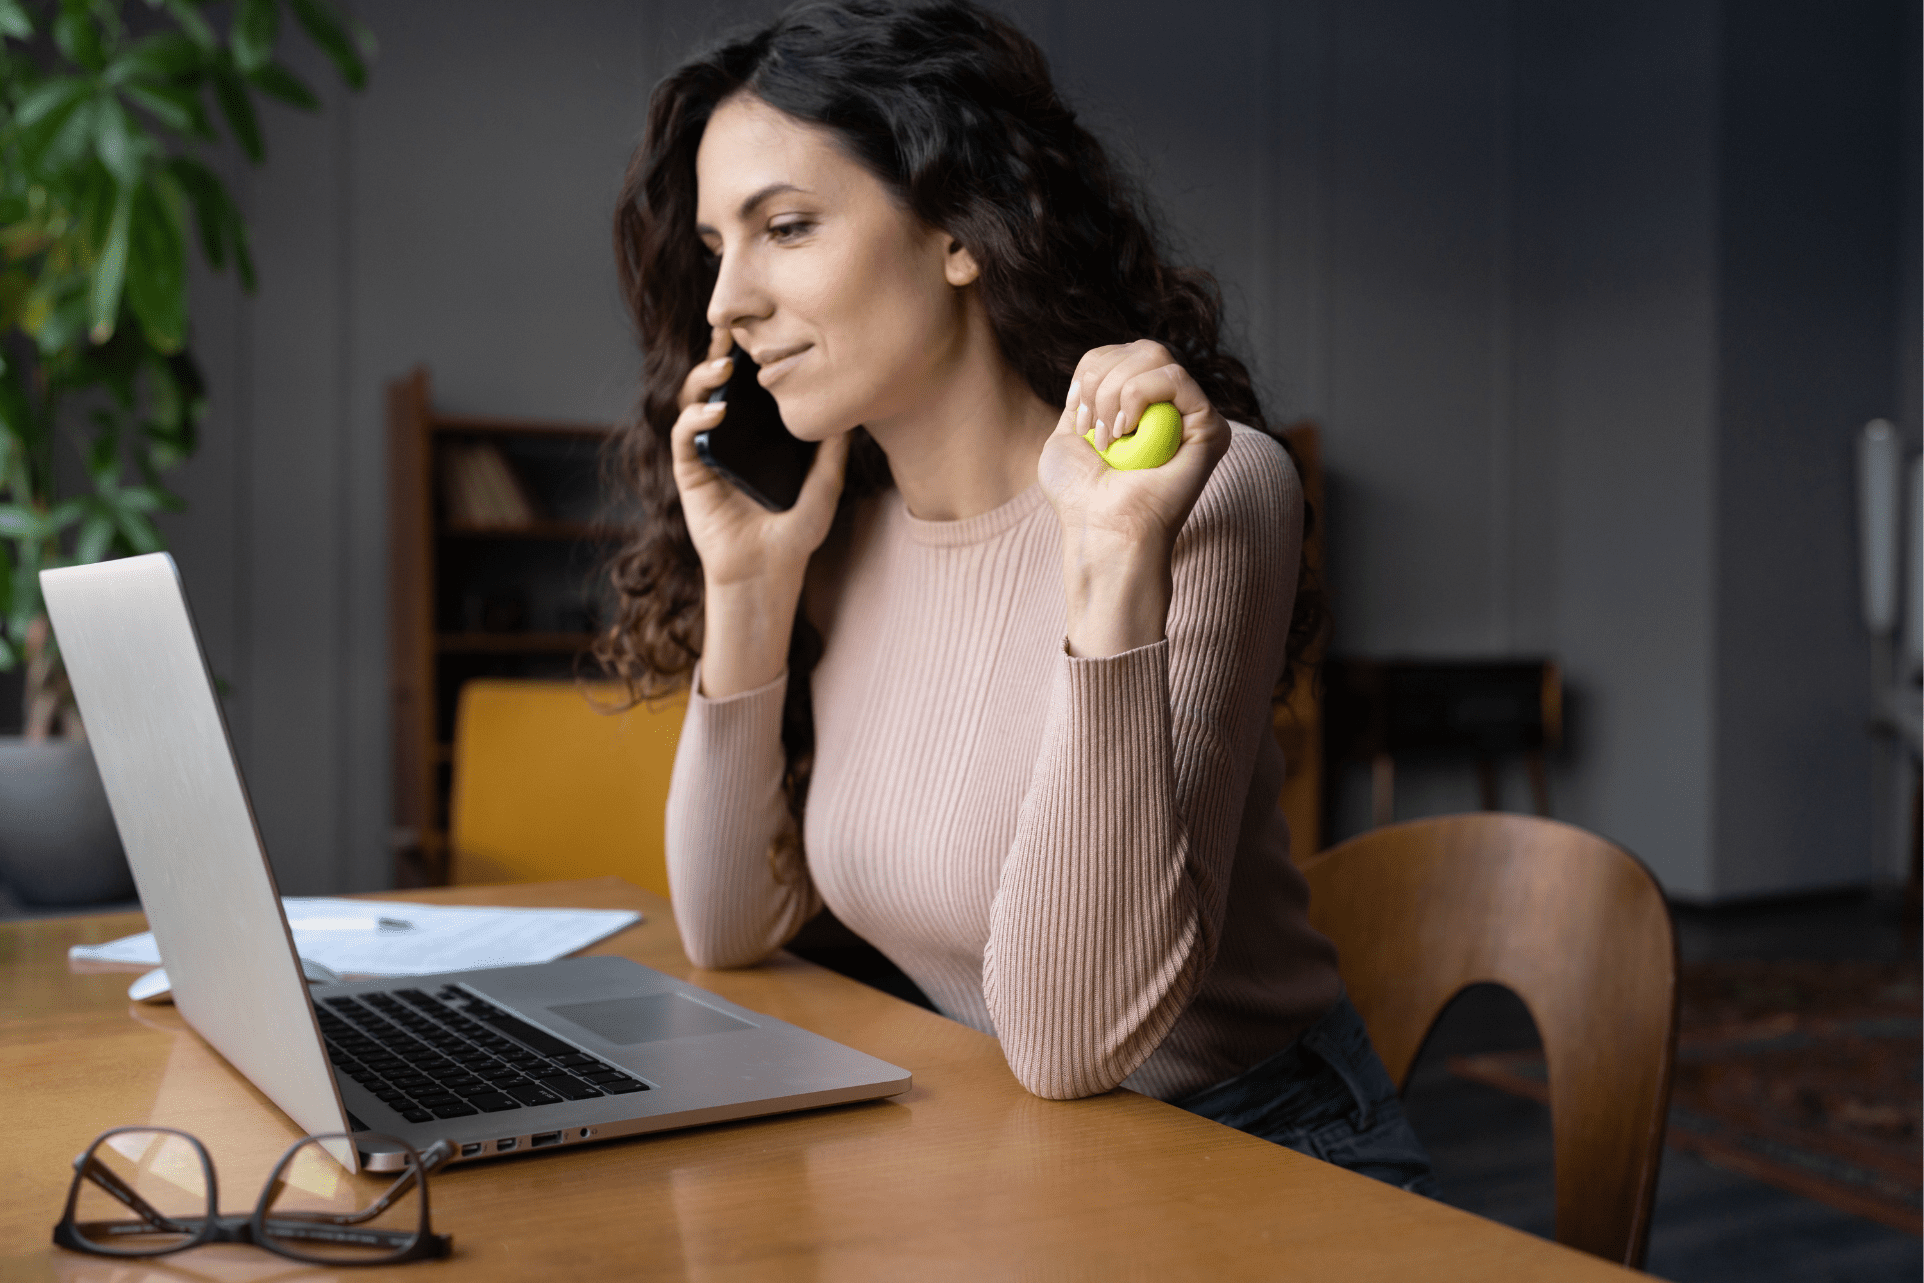 Woman in front of a laptop answering a call on her phone while holding a stress ball